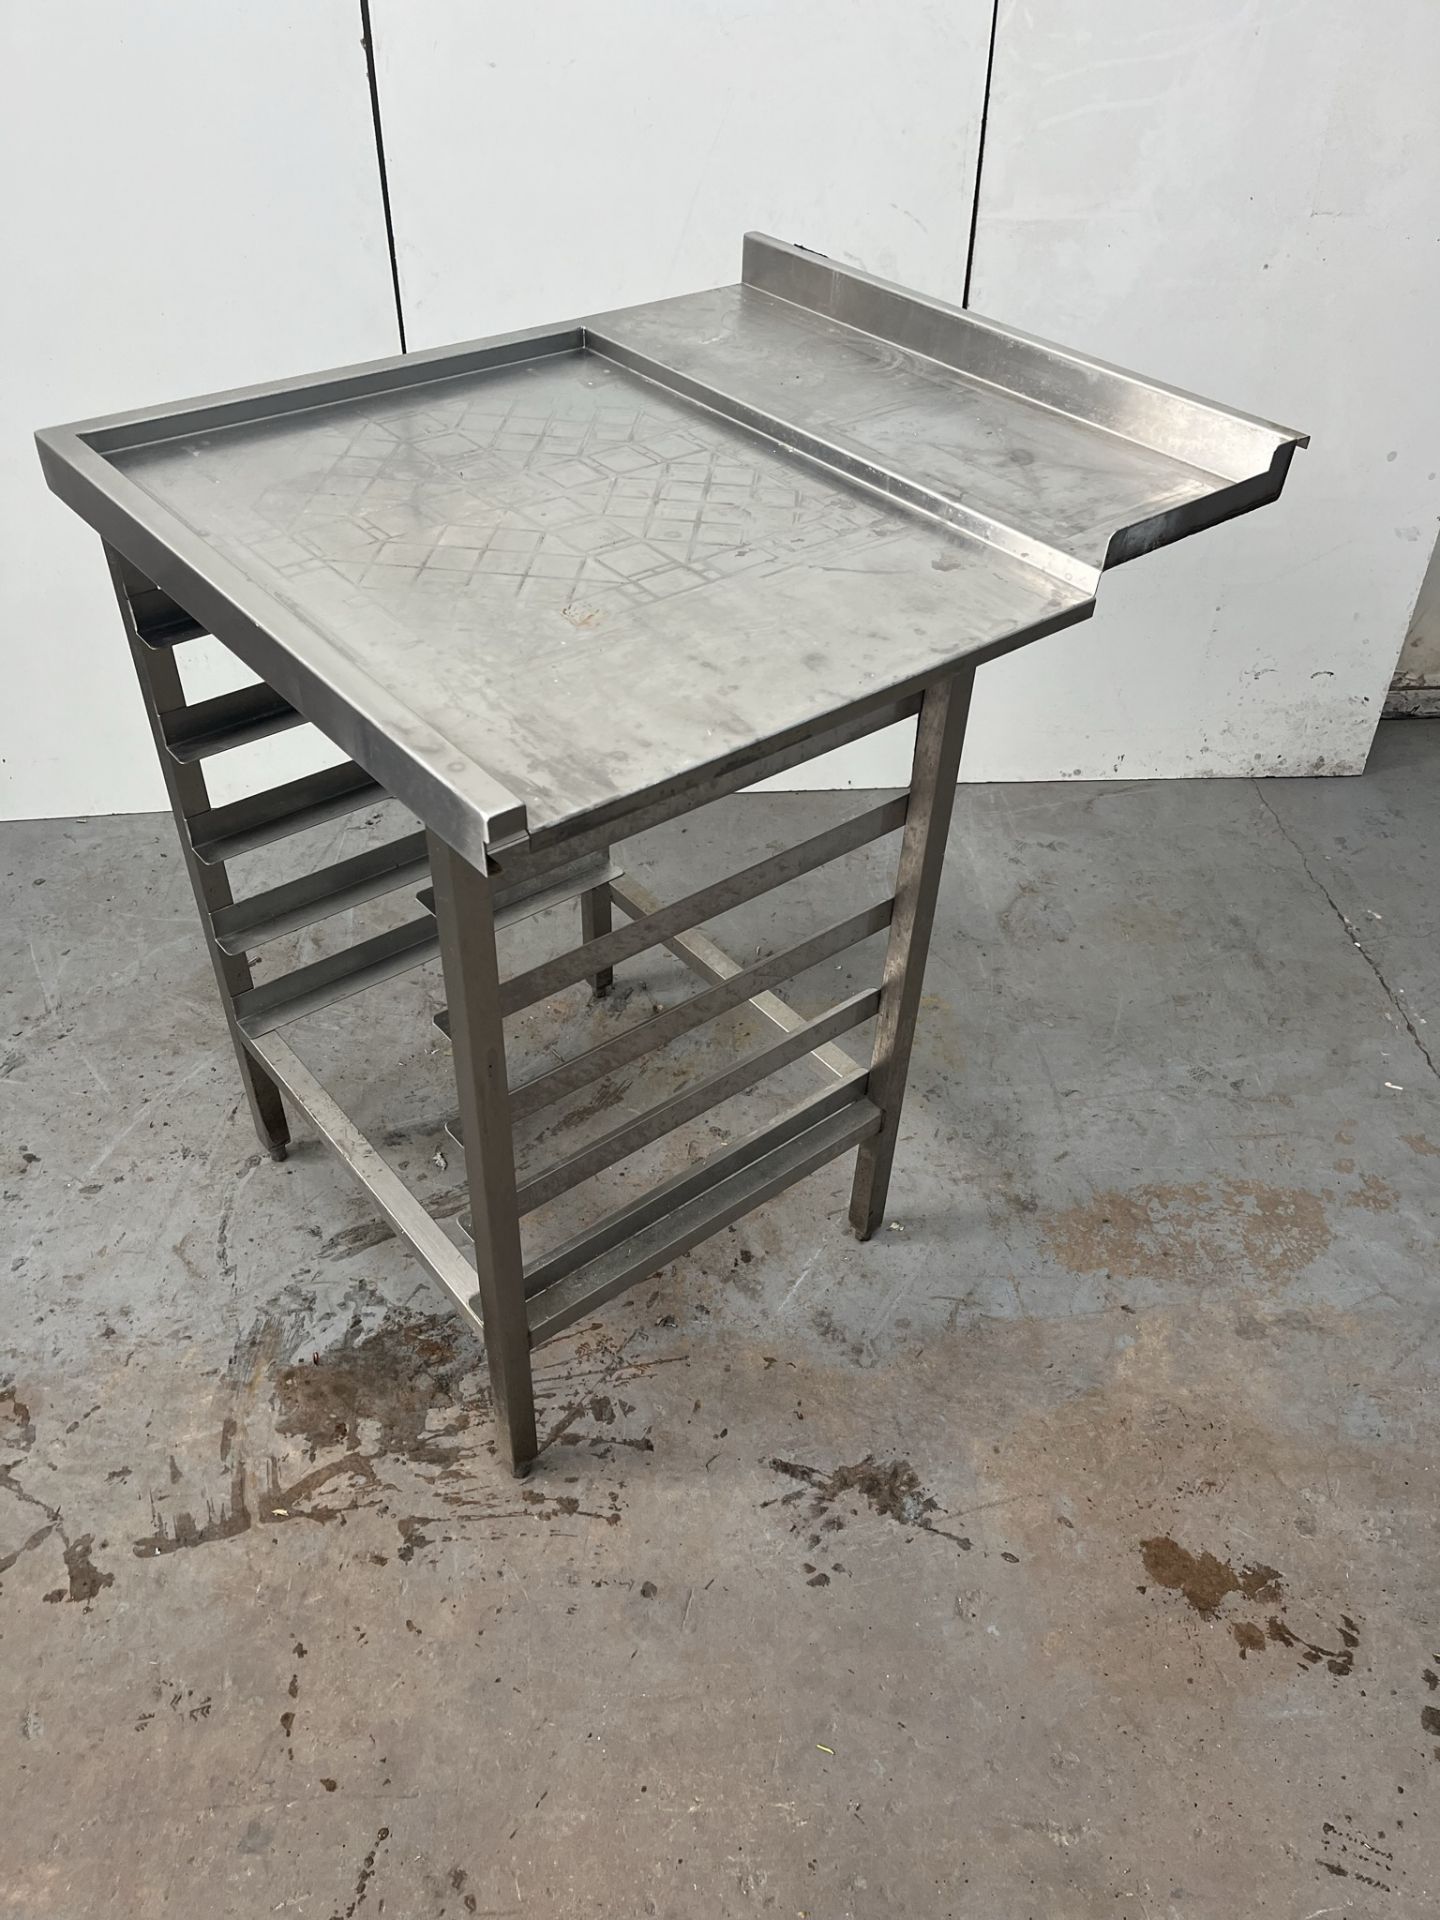 700mm Stainless Steel Catering Preperation Table - Bild 5 aus 5